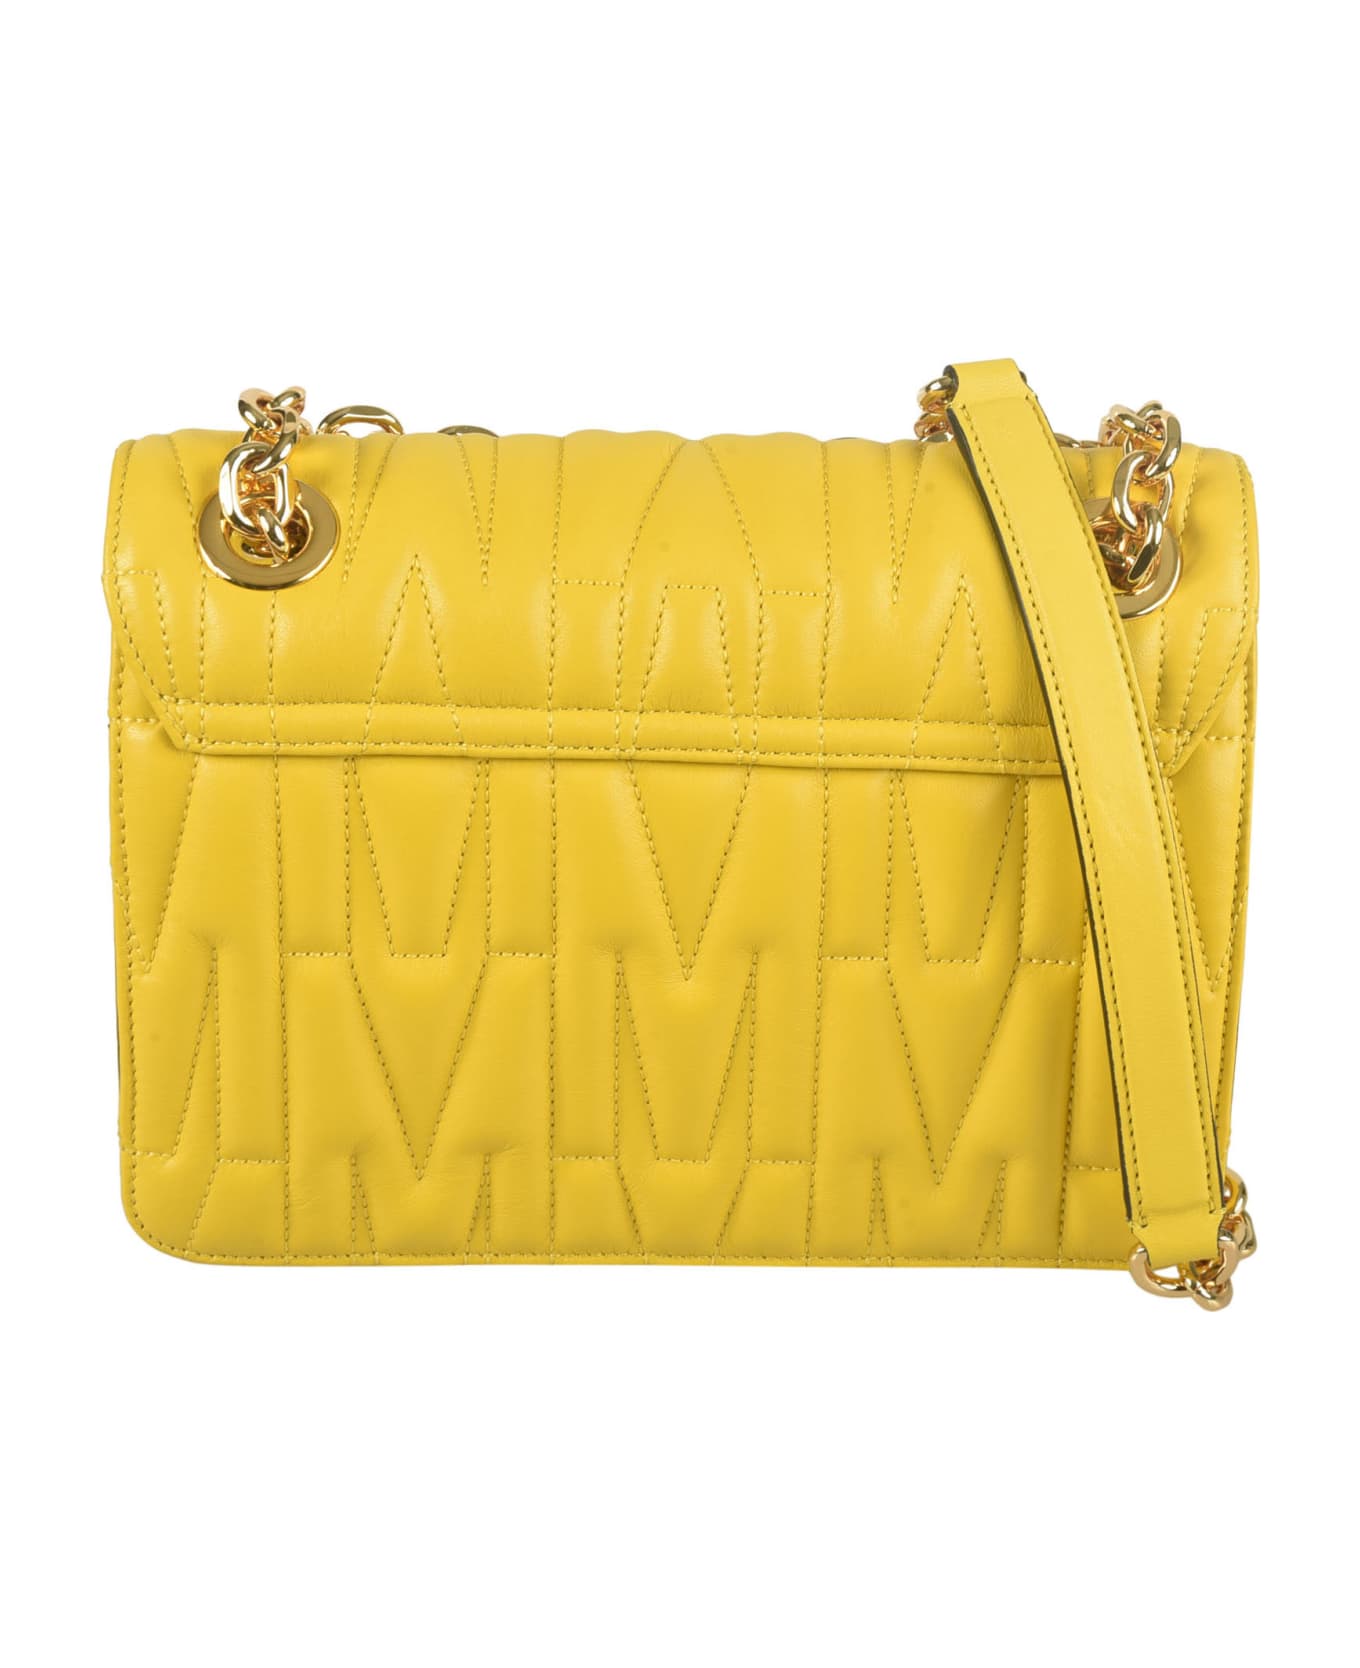 Moschino Logo Quilted Chain Shoulder Bag - 0027